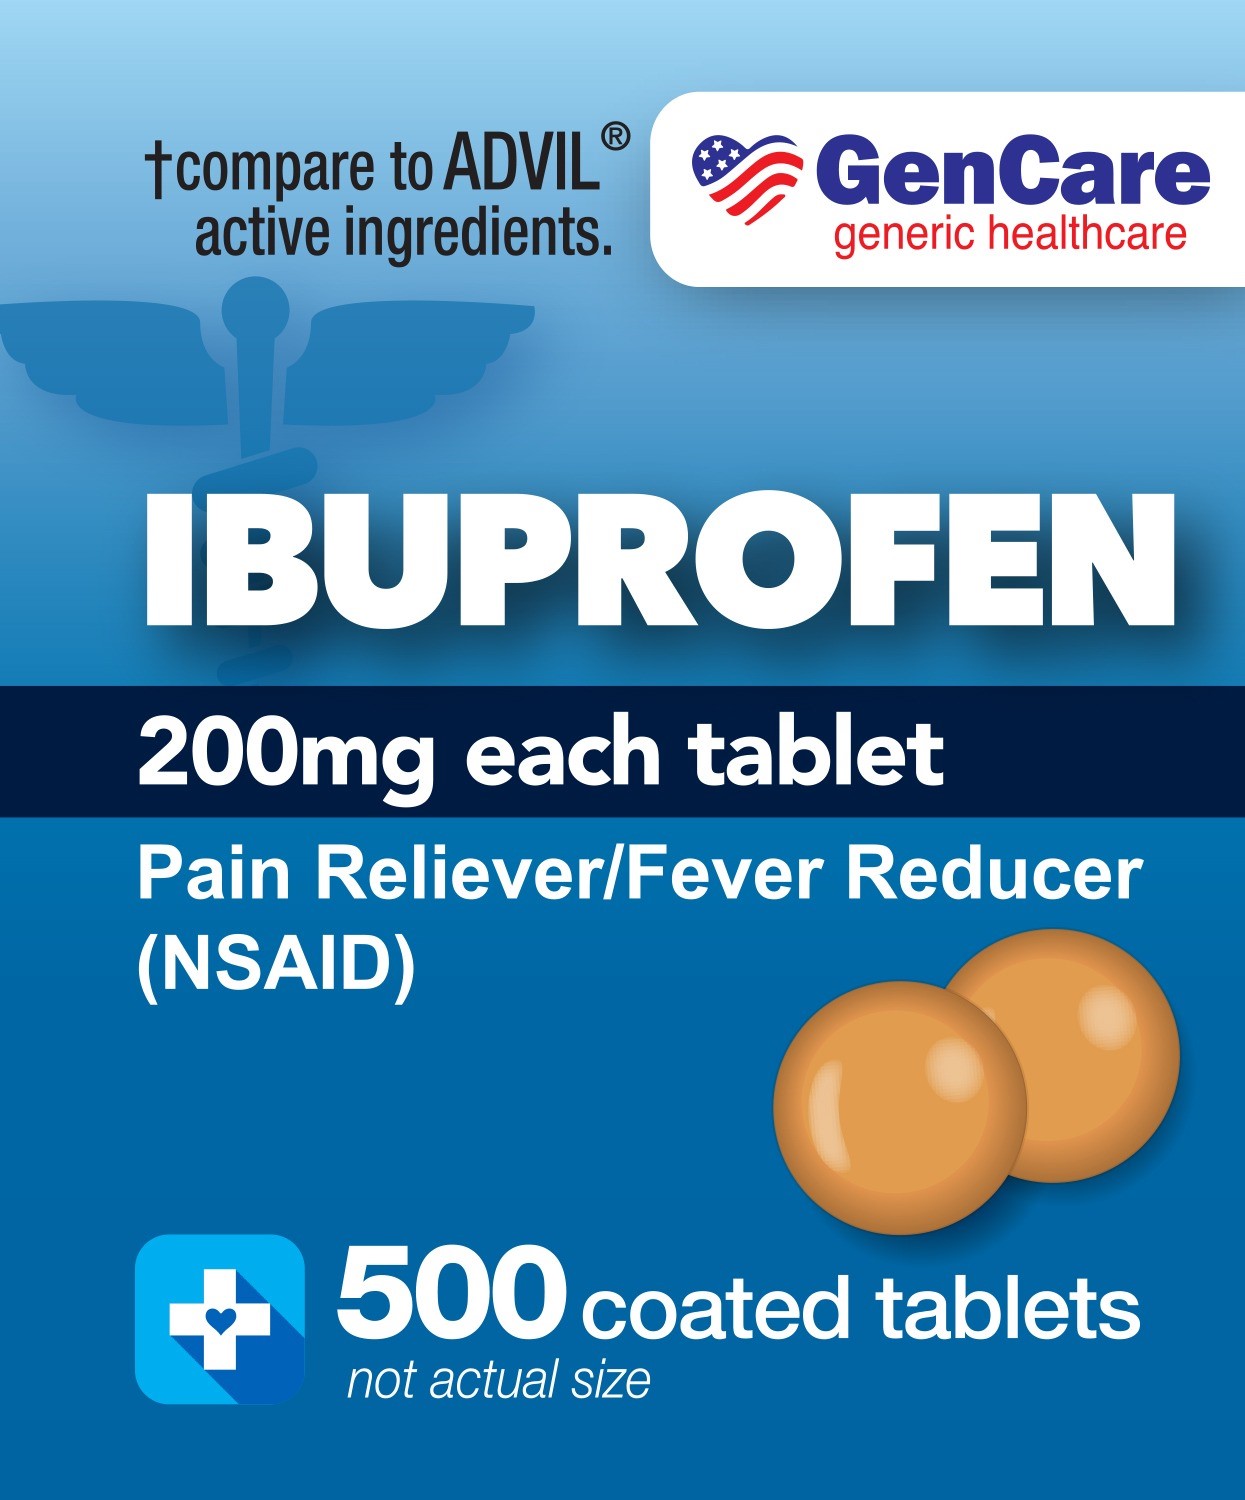 GenCare - Ibuprofen 200mg NSAID (500 Coated Tablets) | Pain Reliever Fever Reducer - image 2 of 5